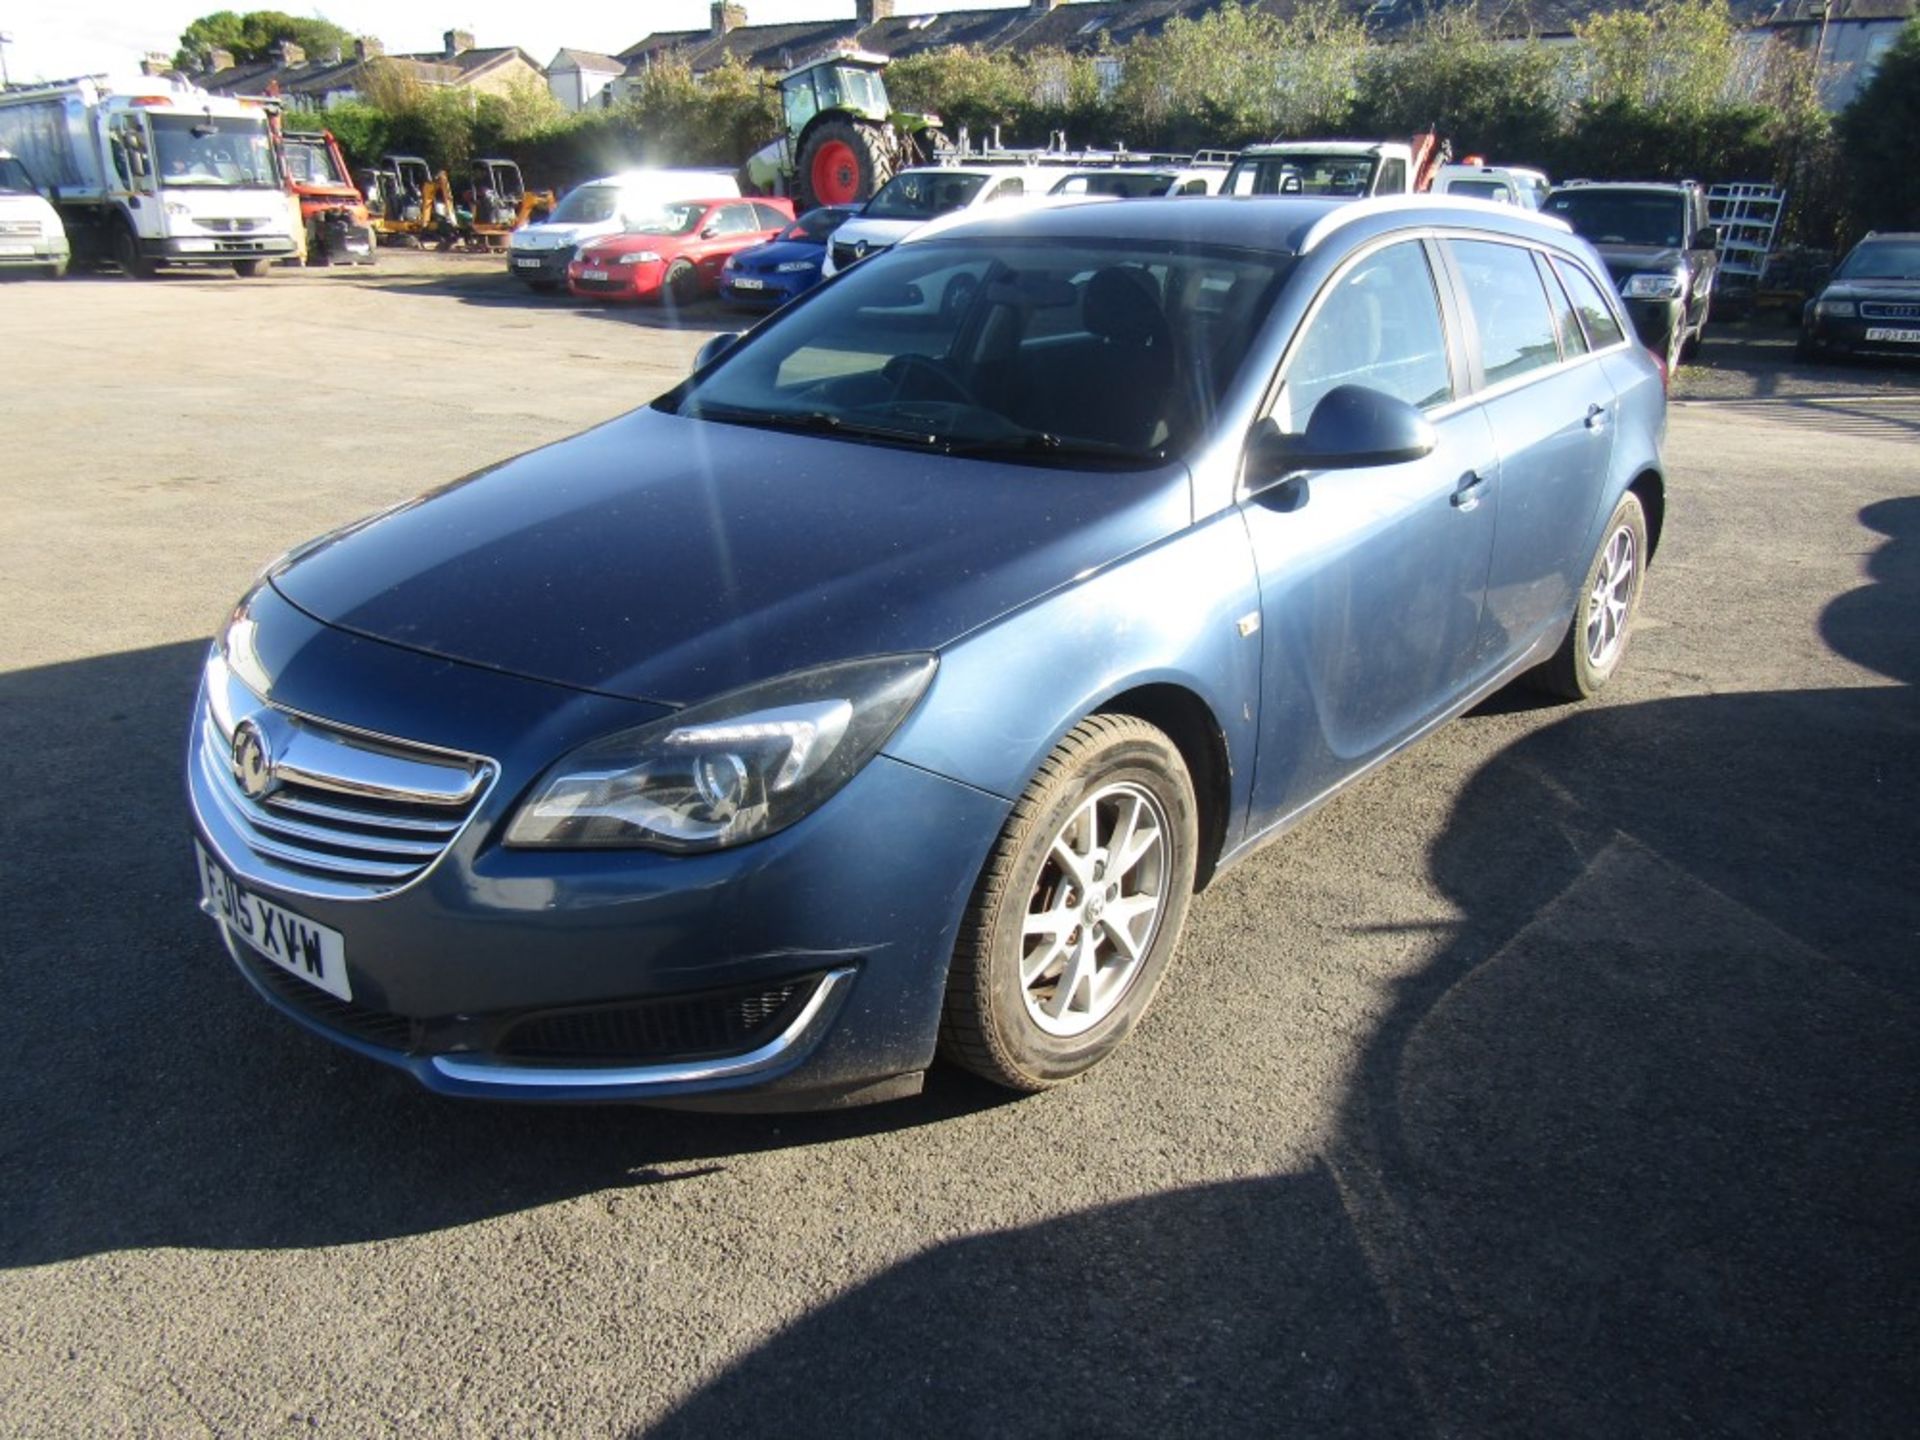 15 reg VAUXHALL INSIGNIA CDTI ECO S/S, 1ST REG 03/15, 193304M, V5 HERE, 2 FORMER KEEPERS [NO VAT] - Image 2 of 6